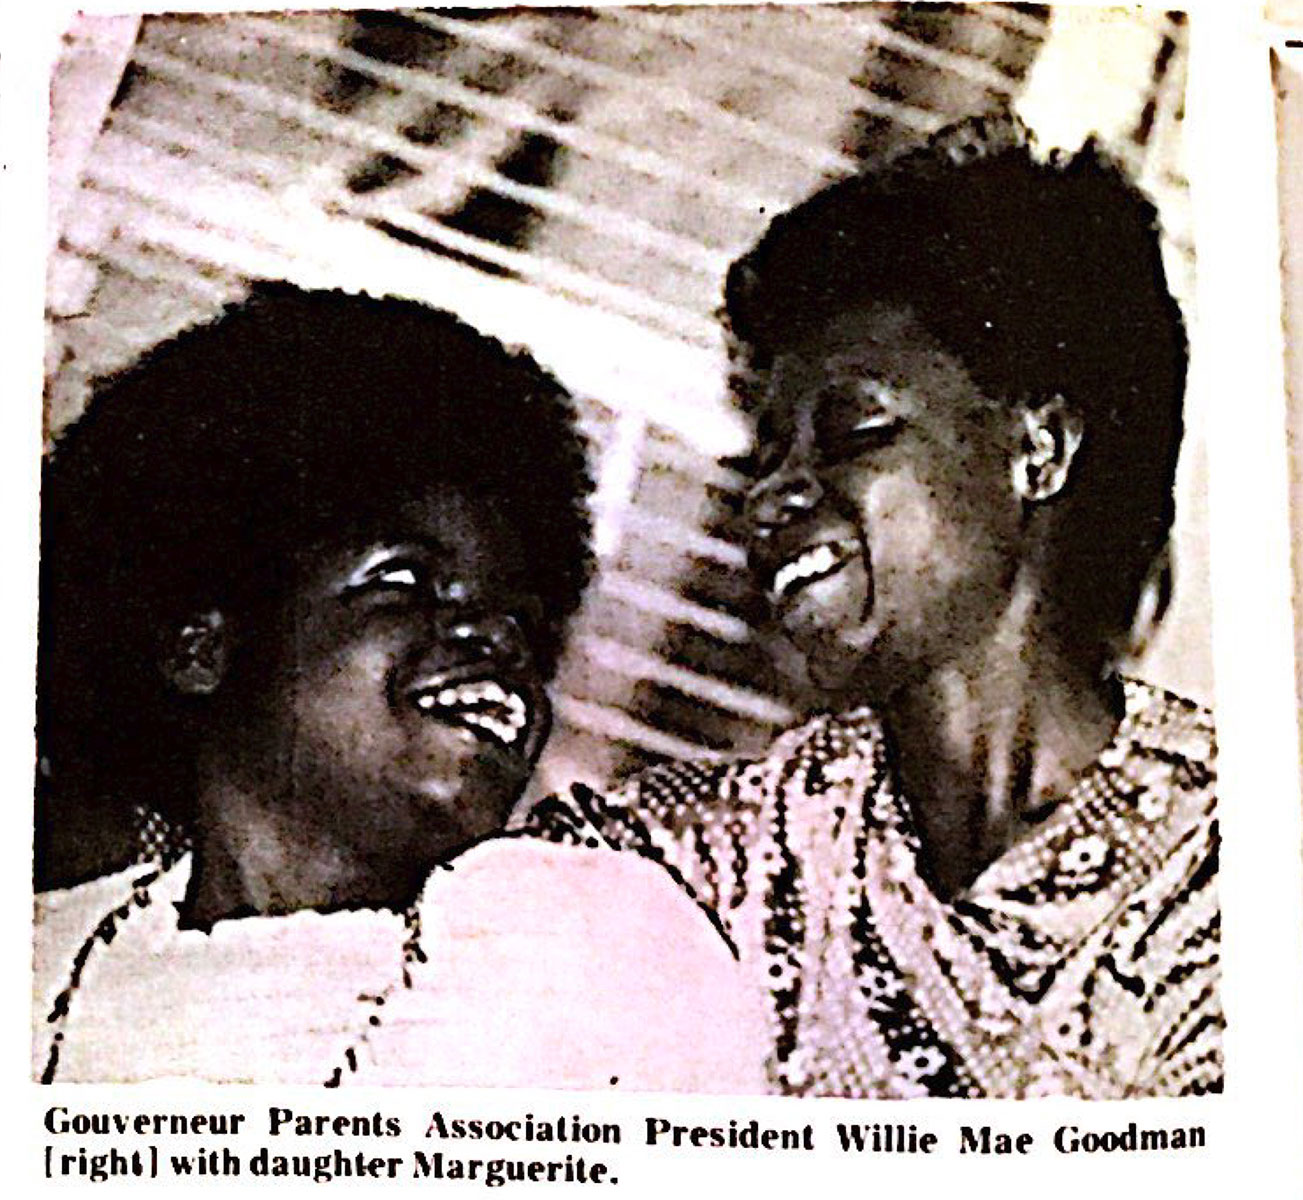 Marguerite Goodman and Willie Mae Goodman sit next to each other. Both are smiling.